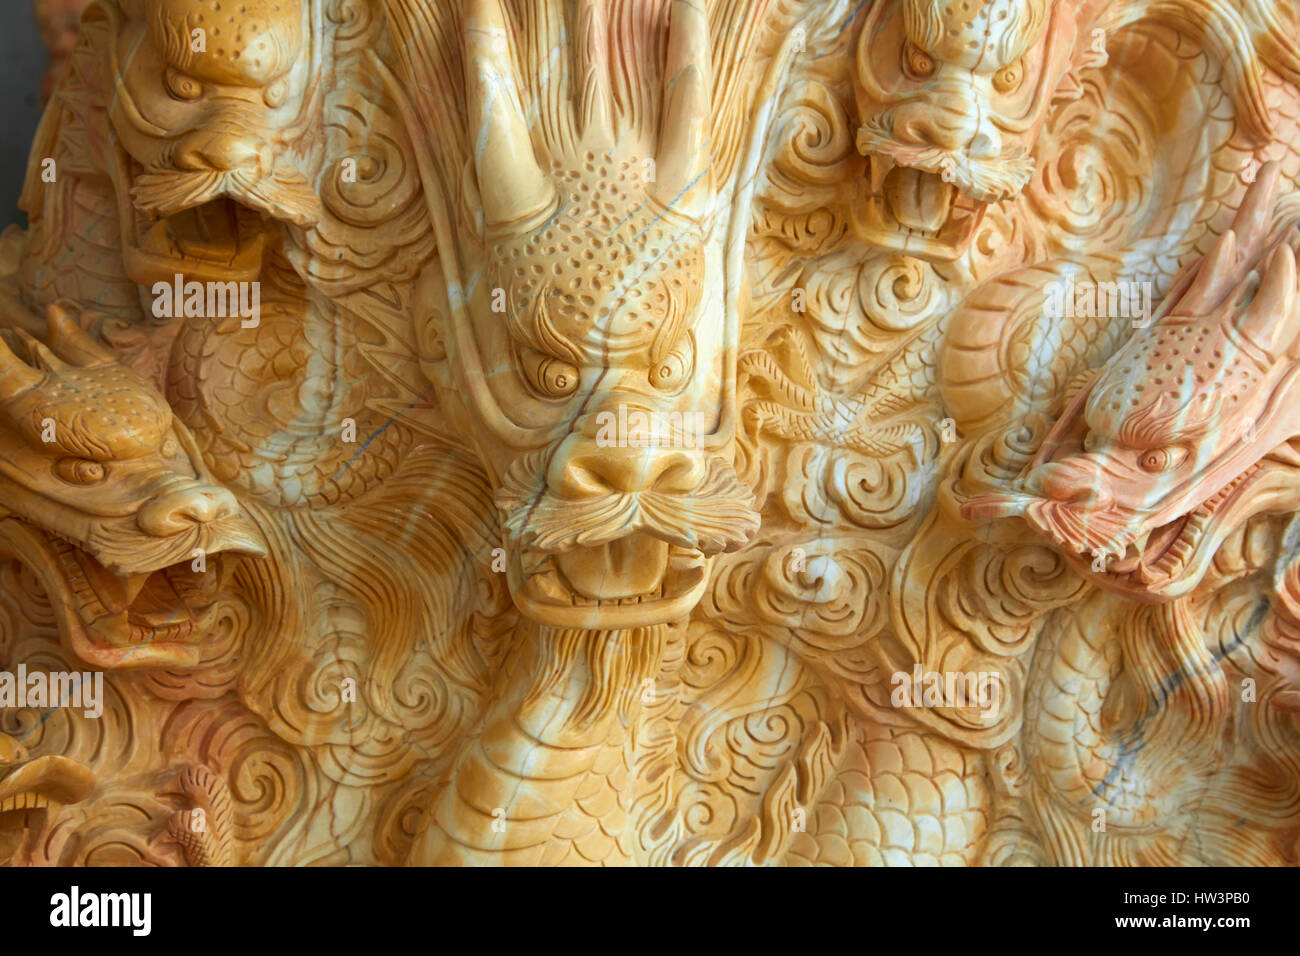 Hand crafted marble dragon sculpture at tourist shop, Marble Mountains, Da Nang, Vietnam Stock Photo